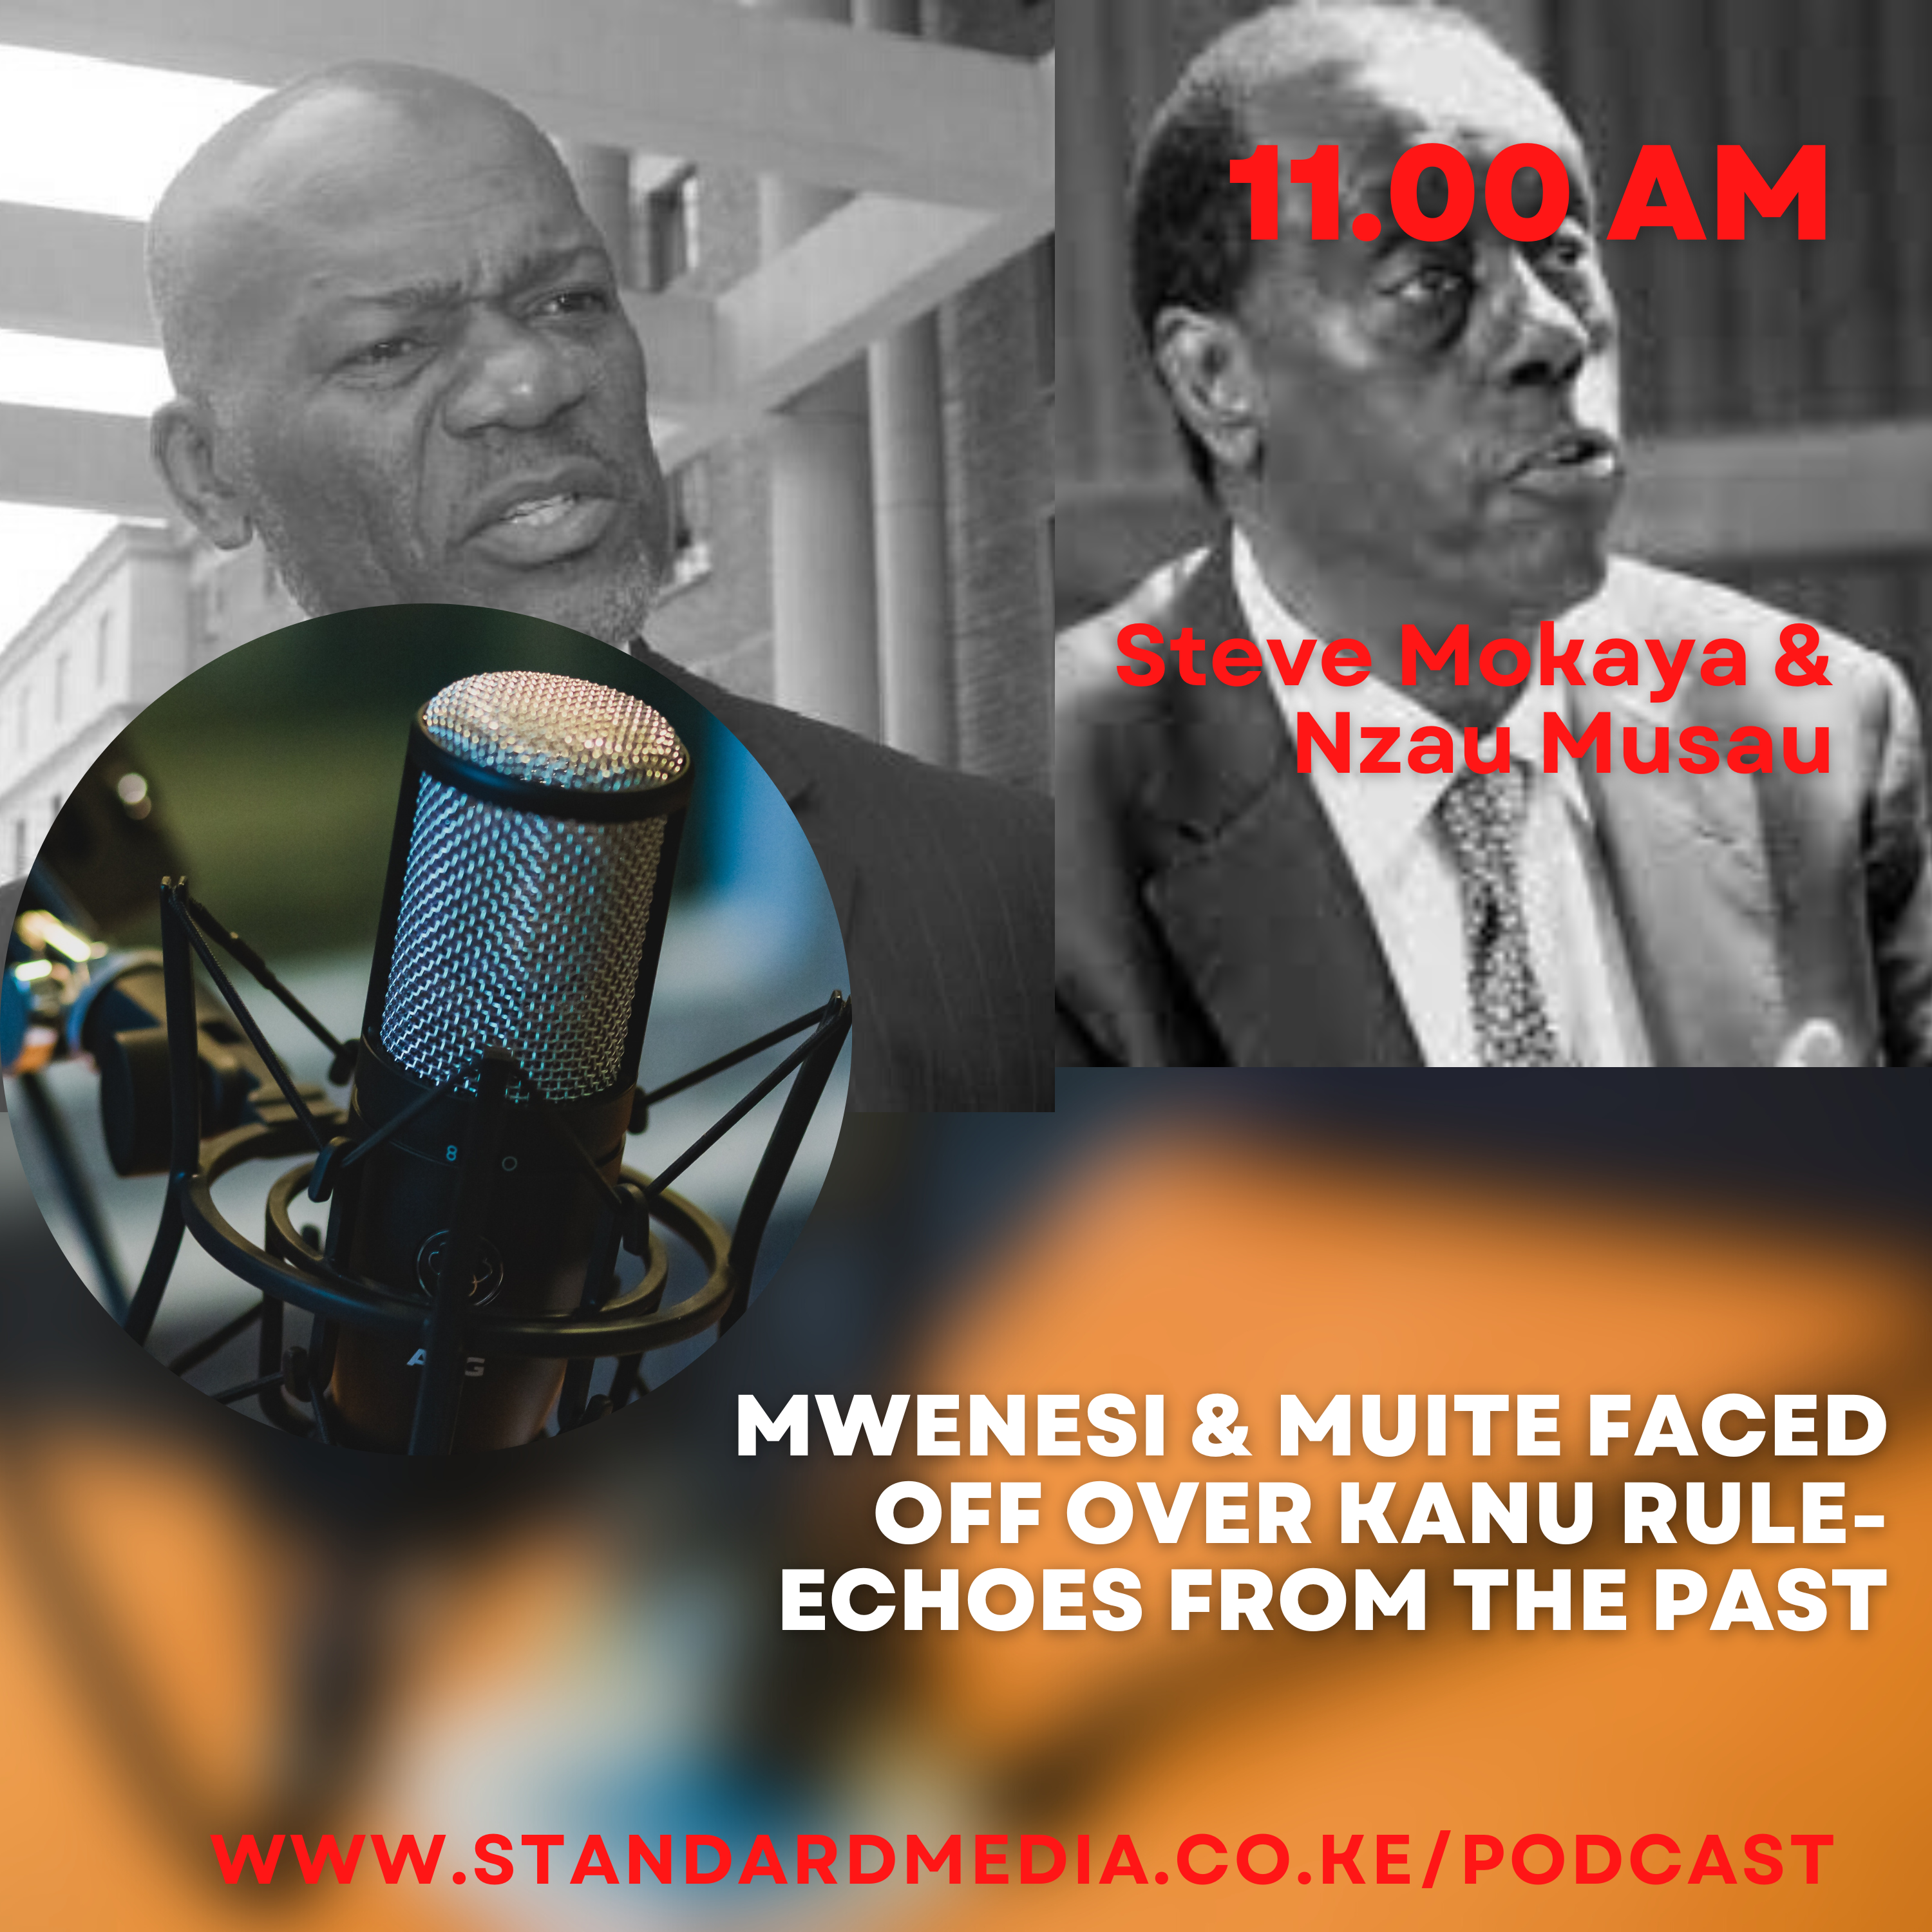 Day Mwenesi & Muite faced off over Kanu rule- Echoes from the past podcast